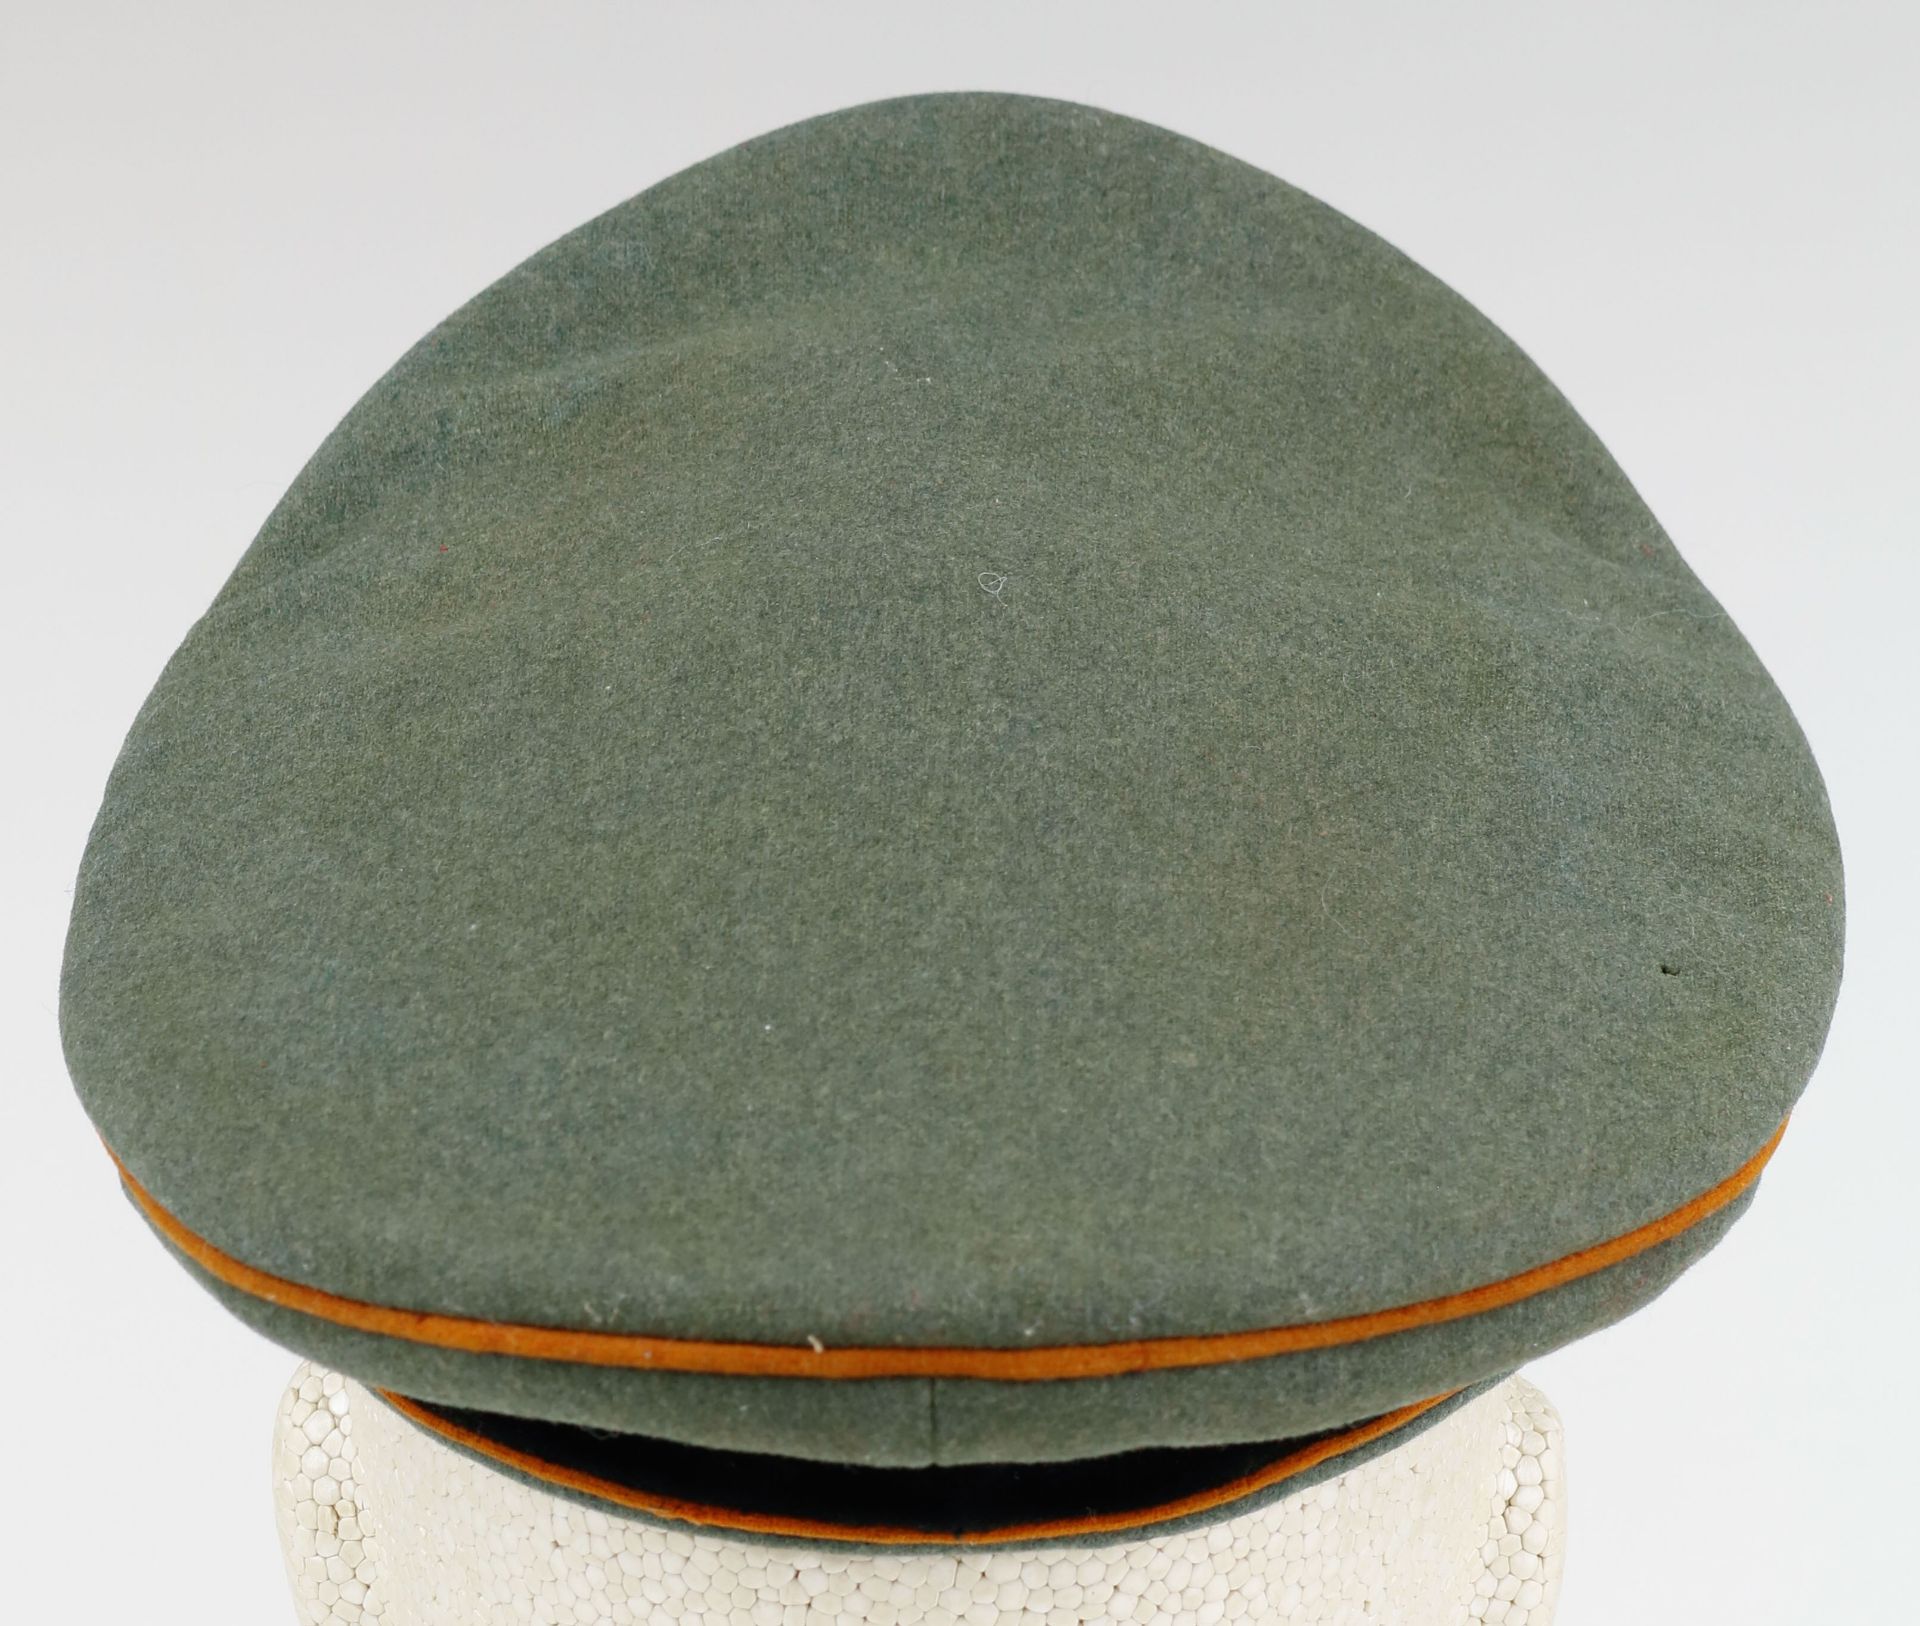 SS CONCENTRATION CAMP 'CRUSHER' VISOR CAP - Image 10 of 17